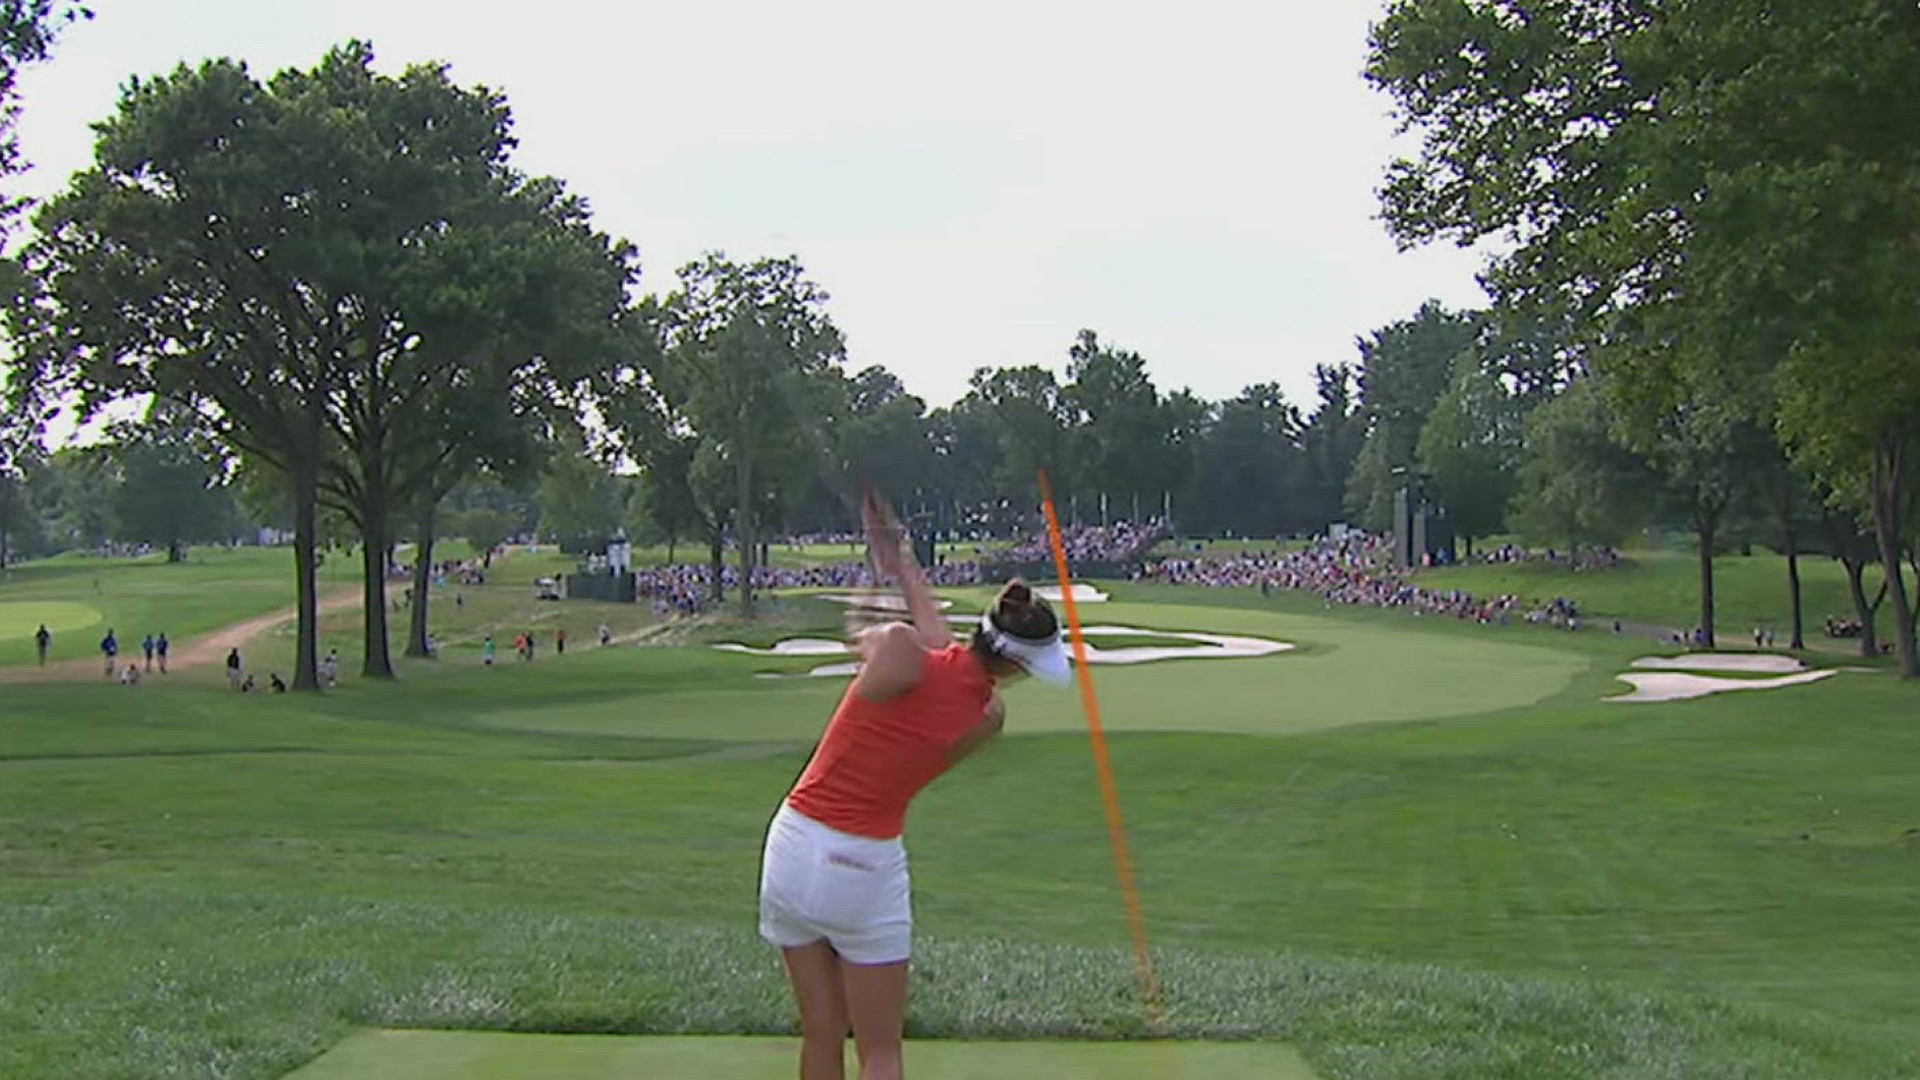 As practice rounds are underway for the U.S. Women's Open, fans can take part in several immersive experiences.